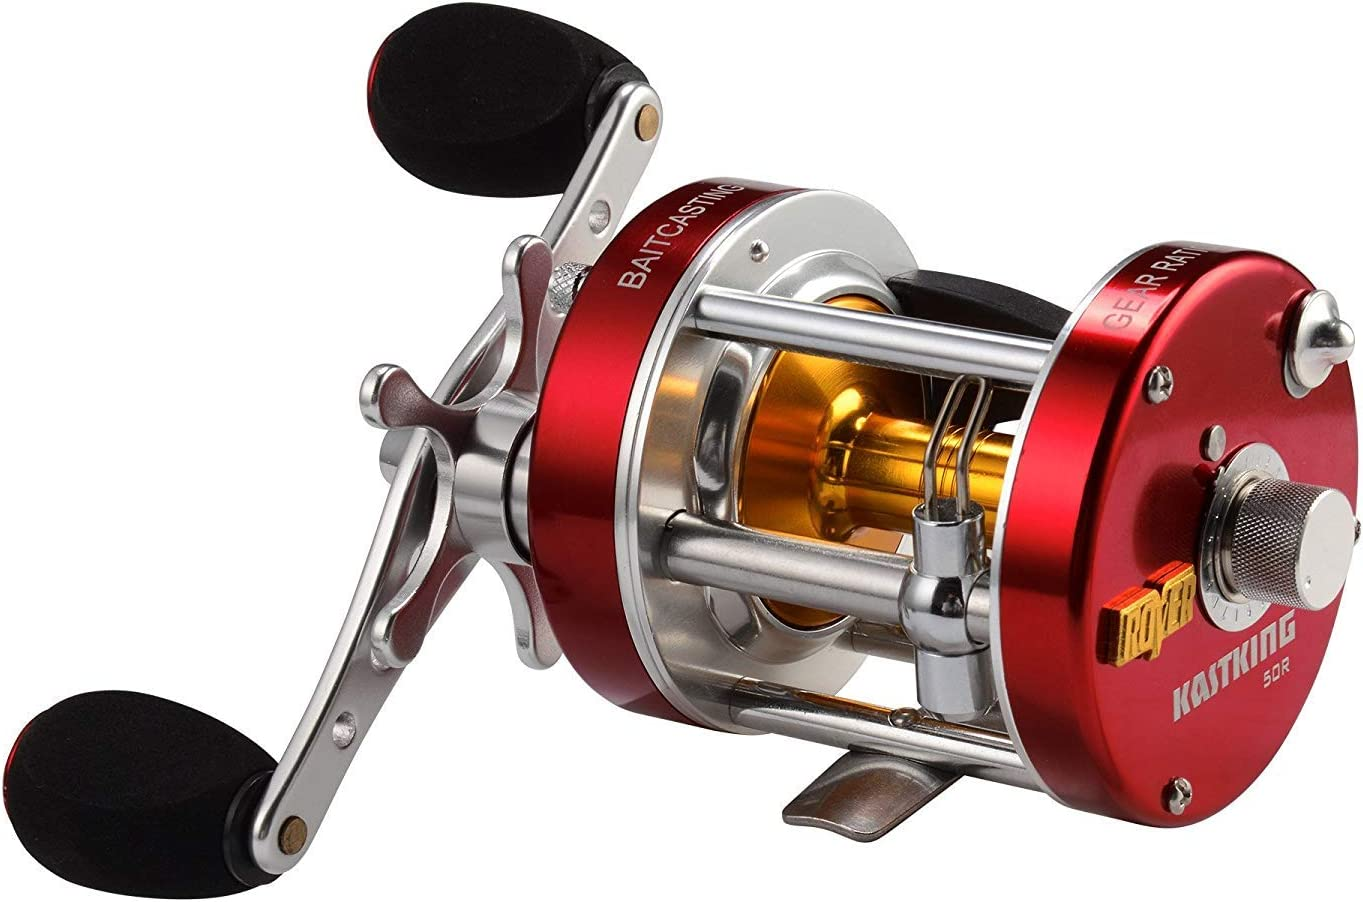 KastKing Rover Round - Best for Conventional Fishing Under $100